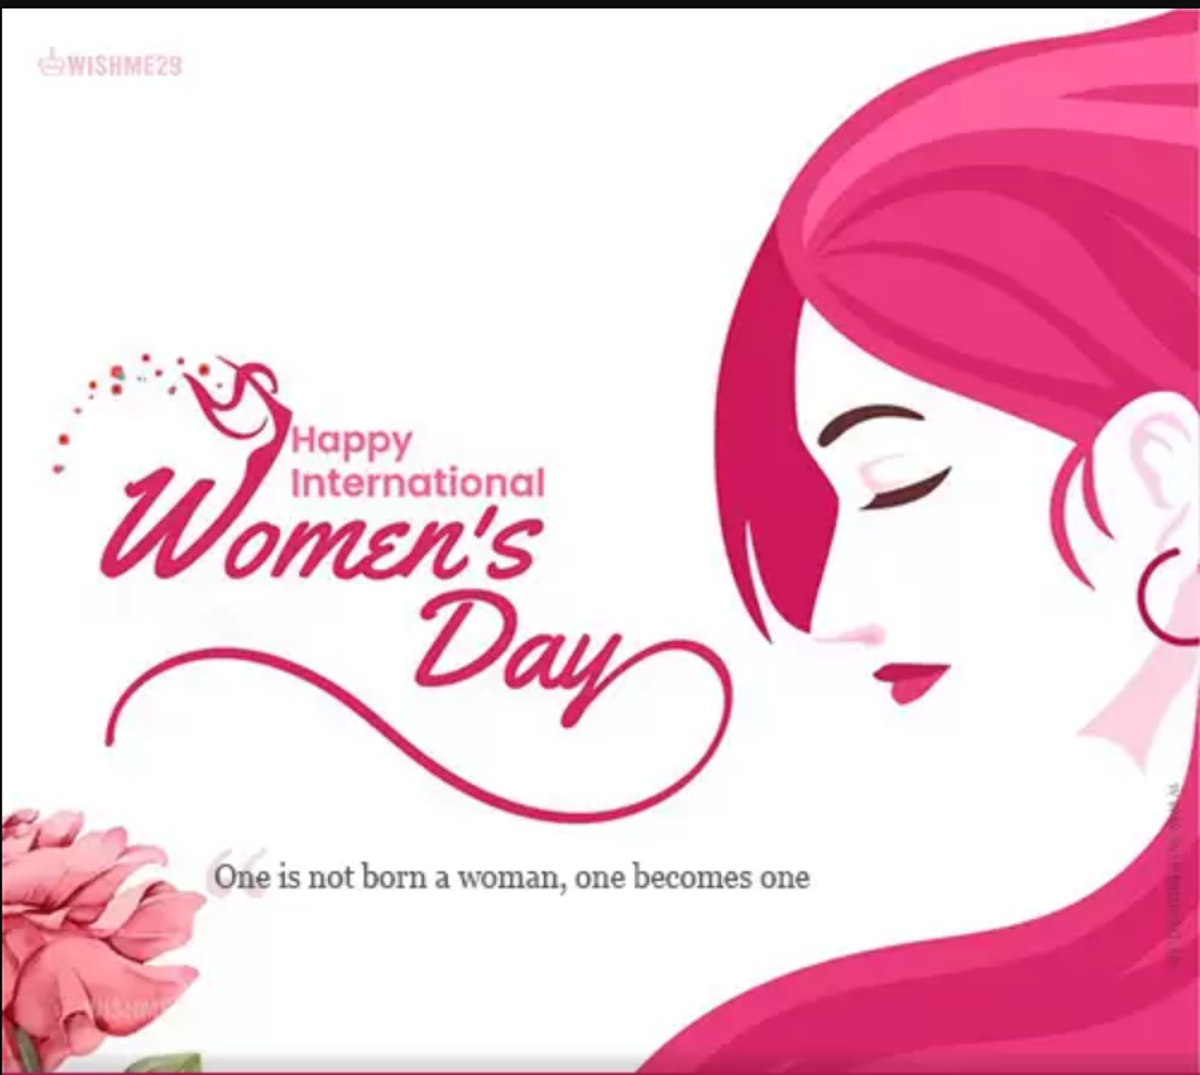 Beauty Unleashed: Pampering Products for International Women's Day 放肆美丽：三八妇女节特选呵护品